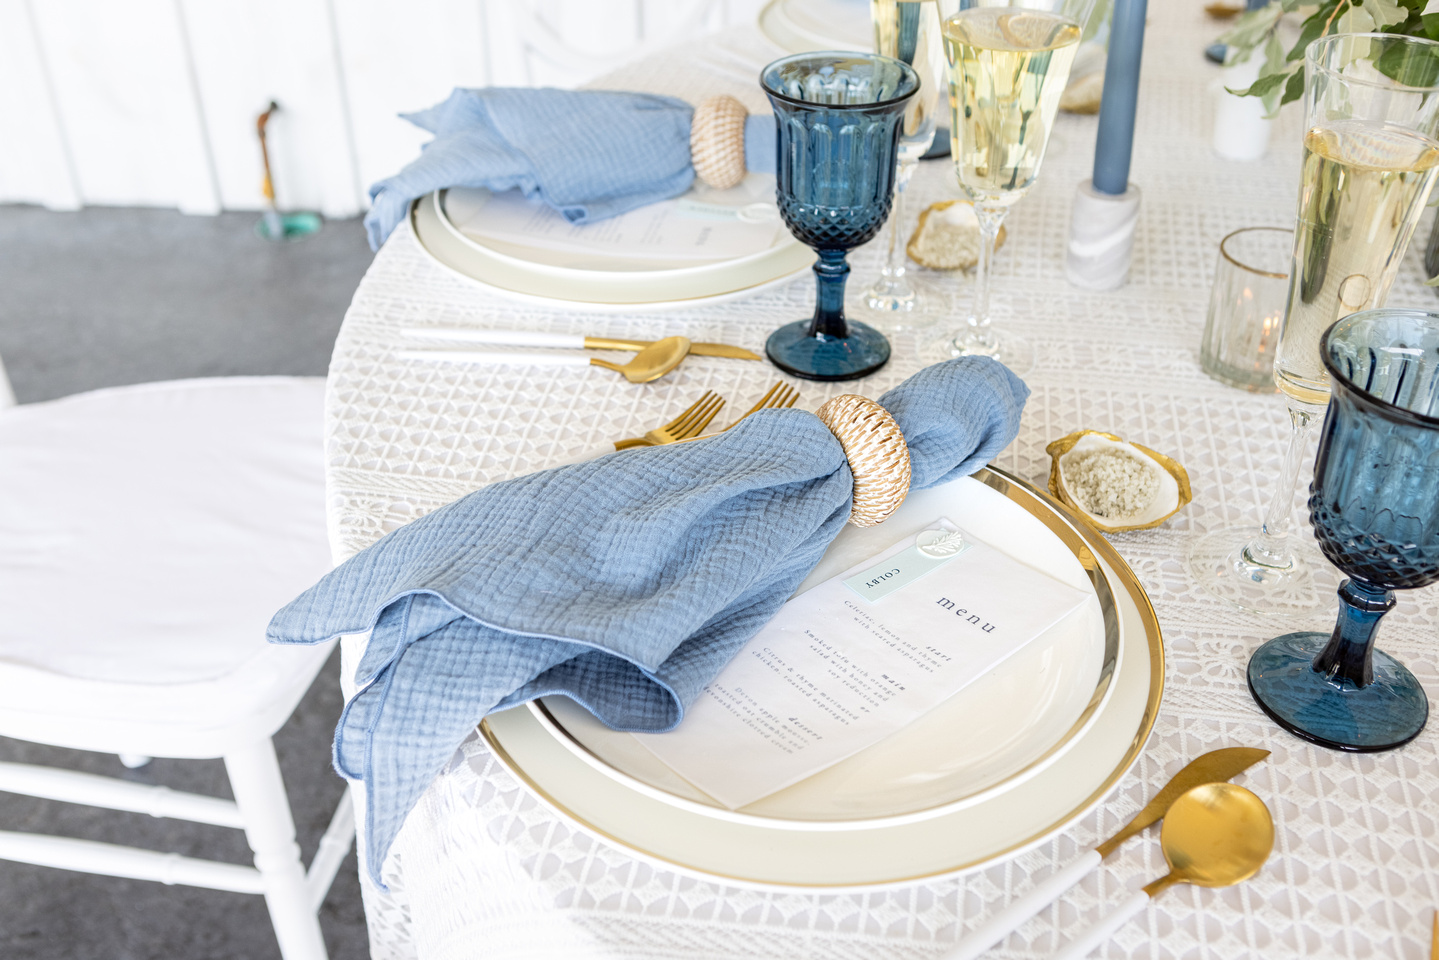 A View of a table with coastal linen